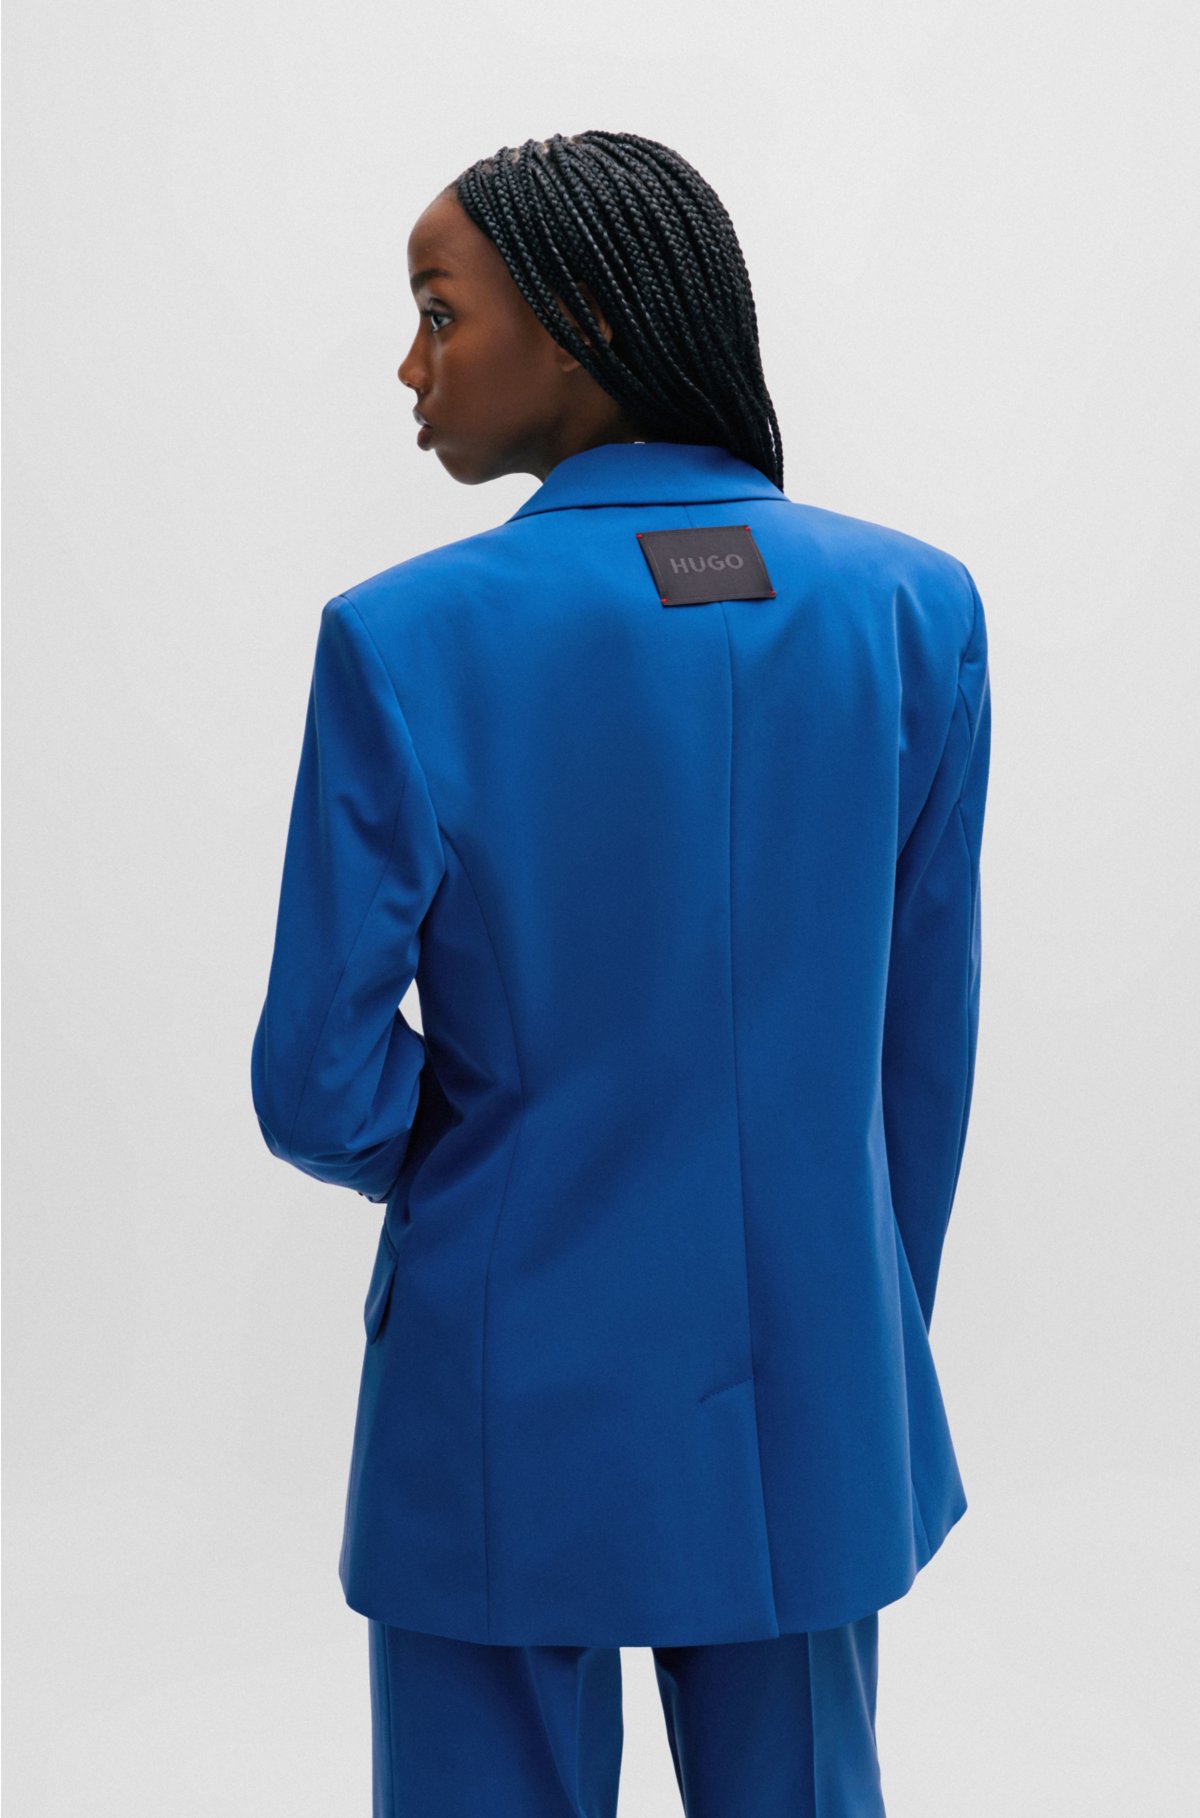 Relaxed-fit double-breasted jacket in stretch fabric, Blue